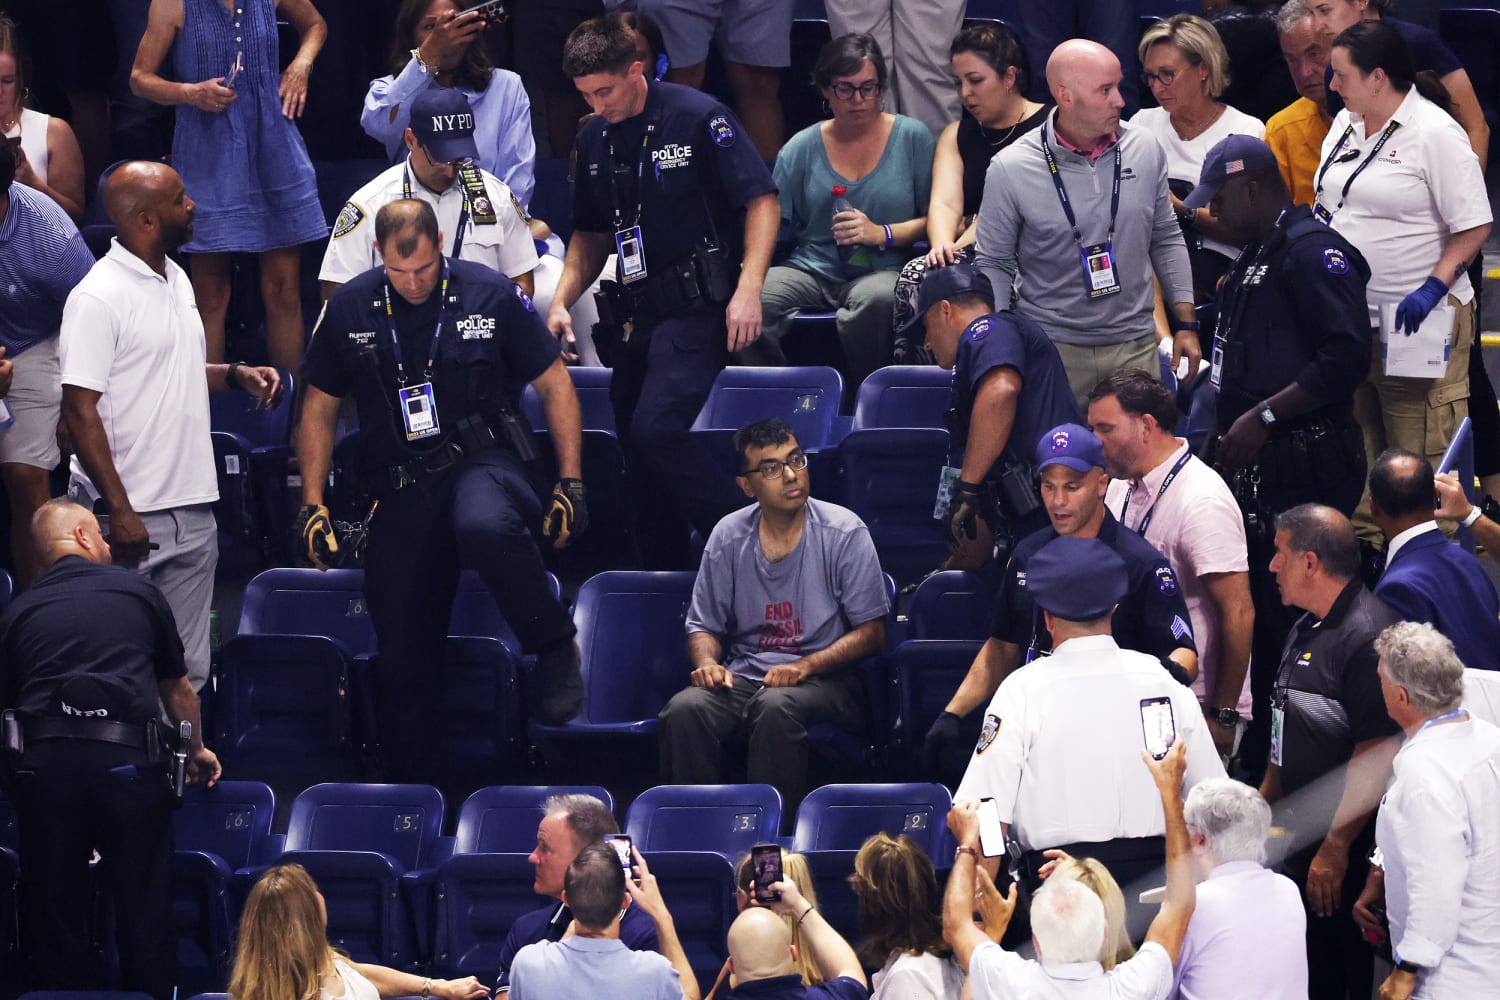 U.S. Open protesters charged with criminal trespass after disrupting match